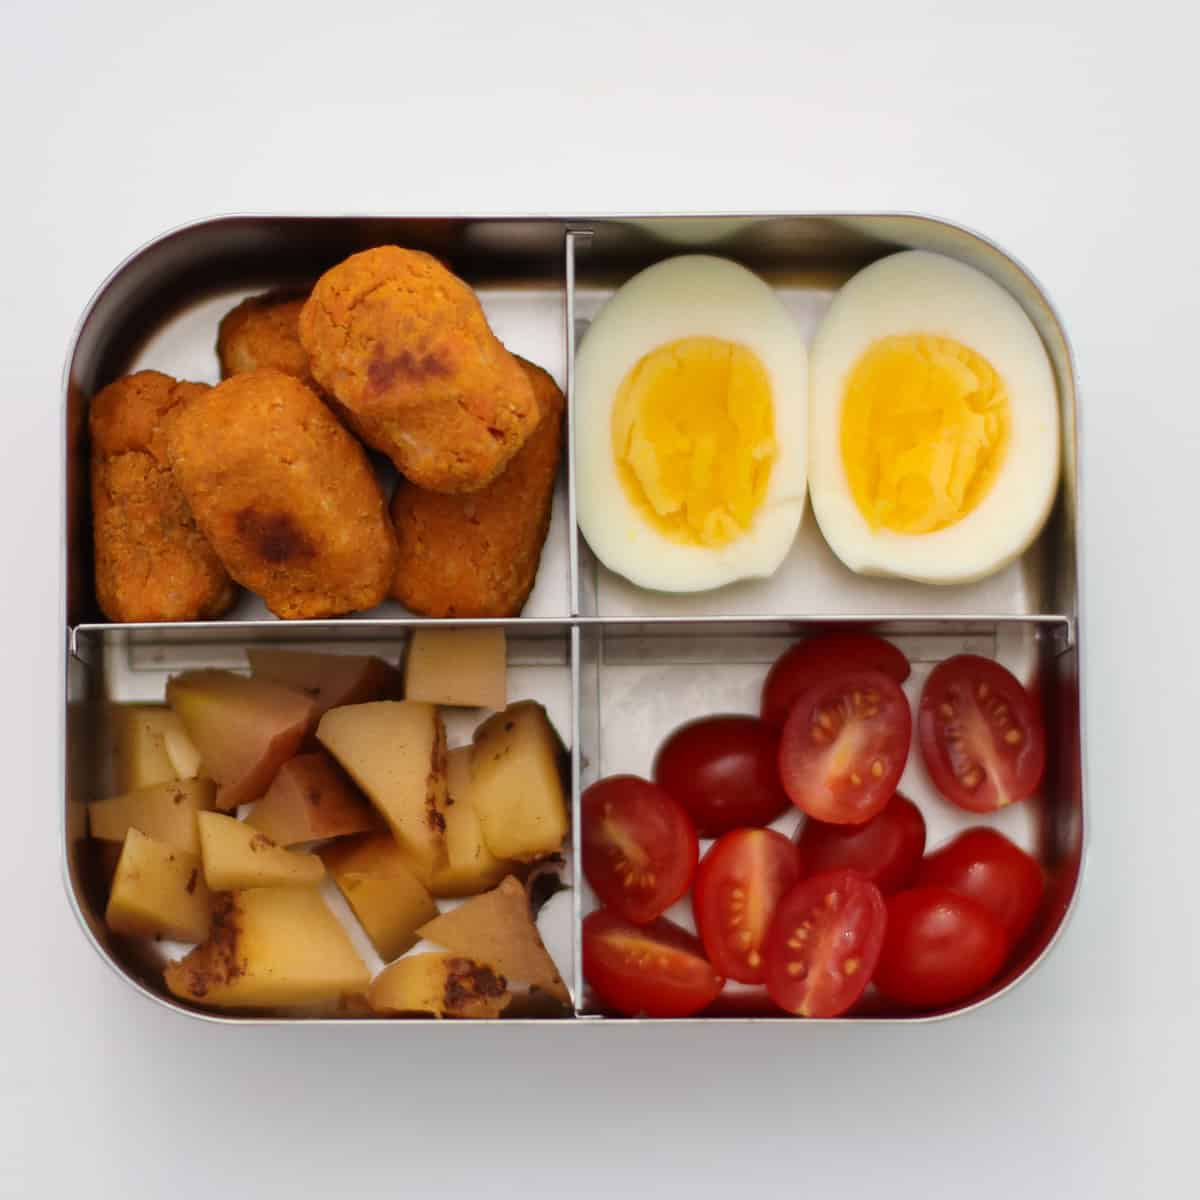 Sweet potato tots with hardboiled eggs, peaches, tomatoes.